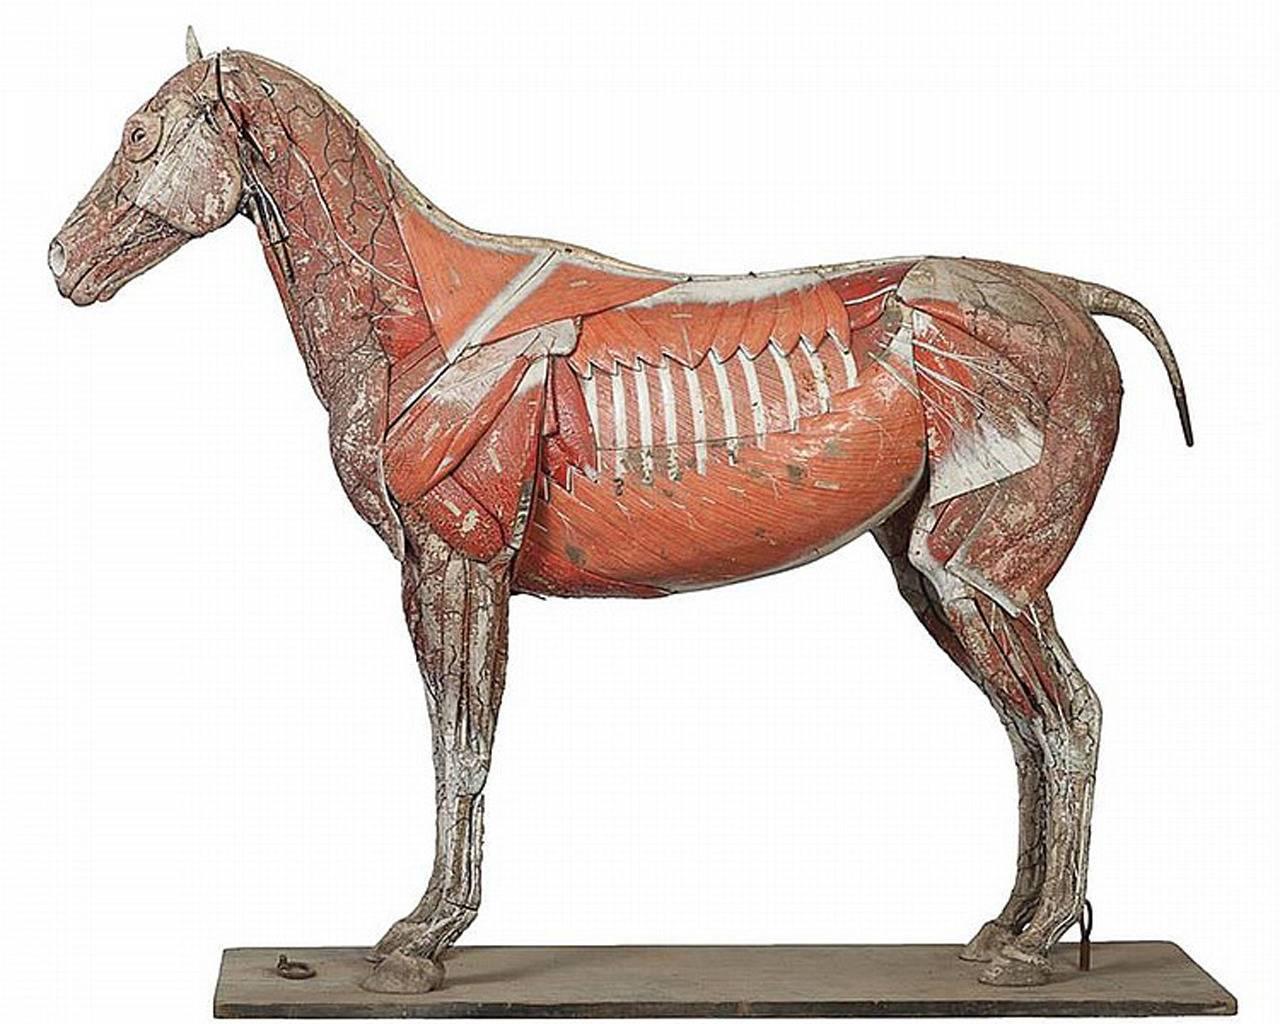 This is one of the largest and rarest of the Dr. Auzoux papier mâché anatomical models. It’s also one of our most ambitious offerings. This prized 1846 first generation handmade model dates to the mid-1800s. I am told that there are almost 200